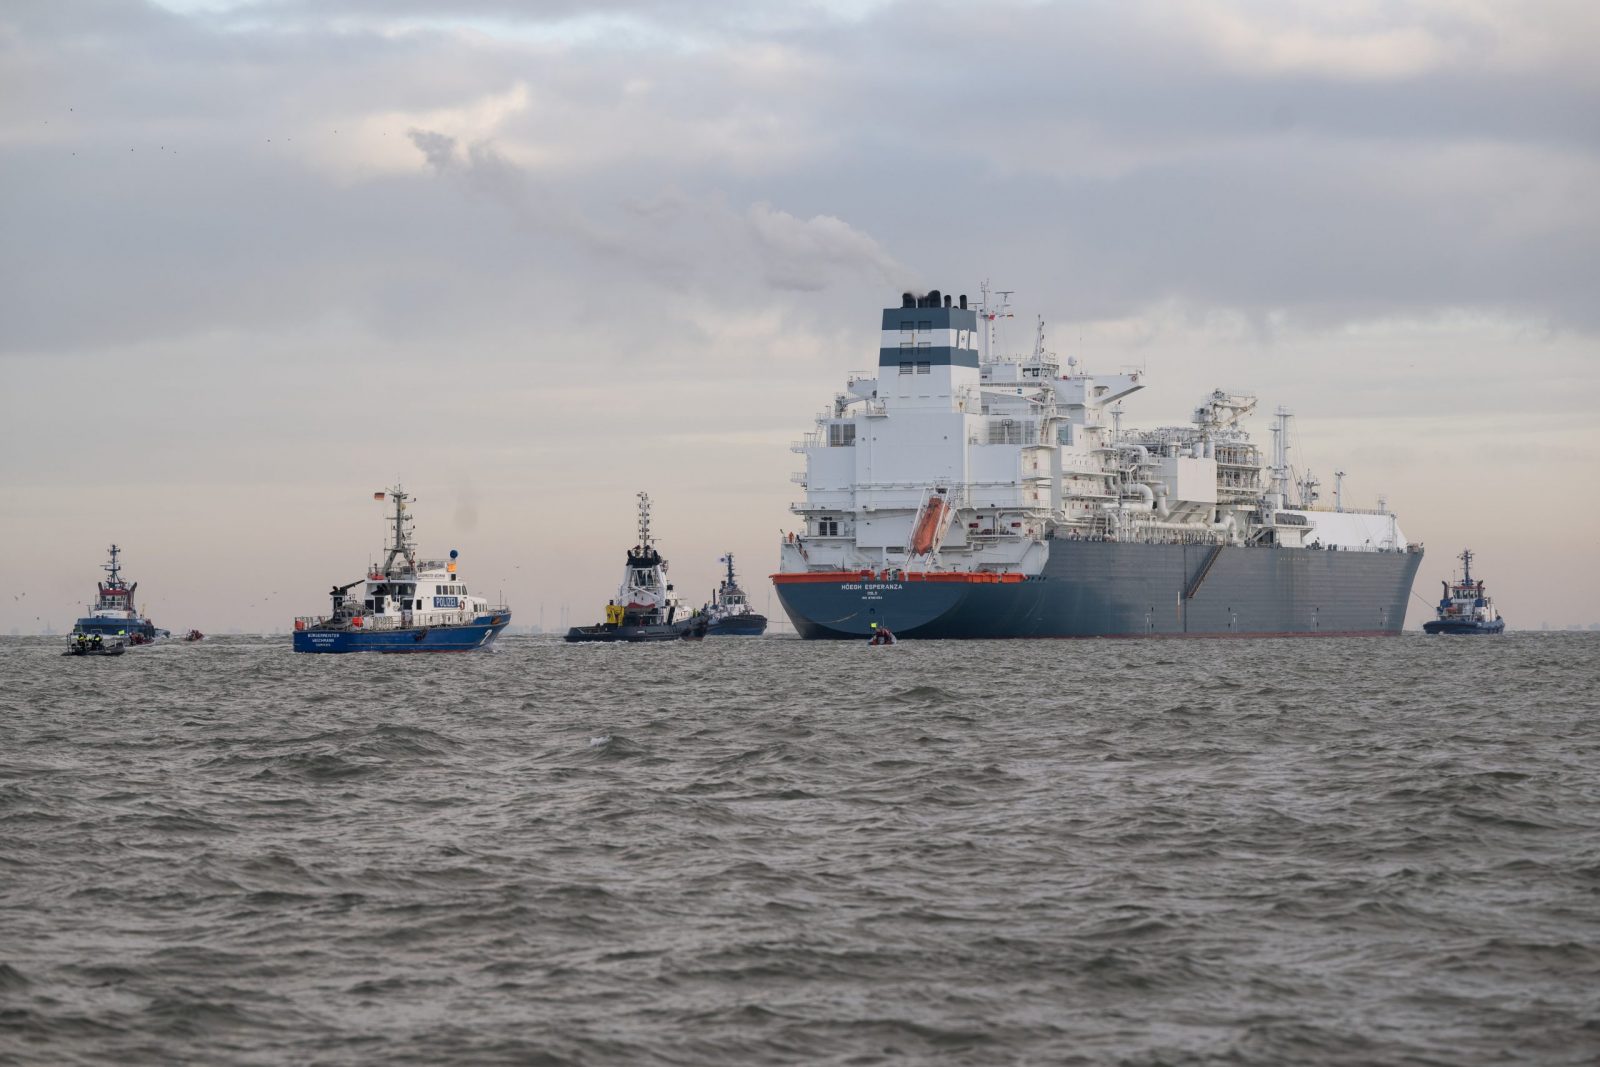 epa10367296 The Hoegh Esperanza', Floating Storage and Regasification Unit (FSRU) ship, arrives to dock at the new LNG terminal in Wilhelmshaven, Germany, 15 December 2022. The 'Hoegh Esperanza' FSRU is a floating facility that will convert liquified natural gas (LNG) arriving on LNG ships into a gaseous state and pump the gas directly into Germany's northern natural gas pipeline network from the Wilhelmshaven site. The new terminal, which will be officially inaugurated on 17 December is one several new LNG terminals Germany is building on its northern coasts as it seeks to pivot away from its previous reliance on natural gas imports from Russia.  EPA/DAVID HECKER / POOL